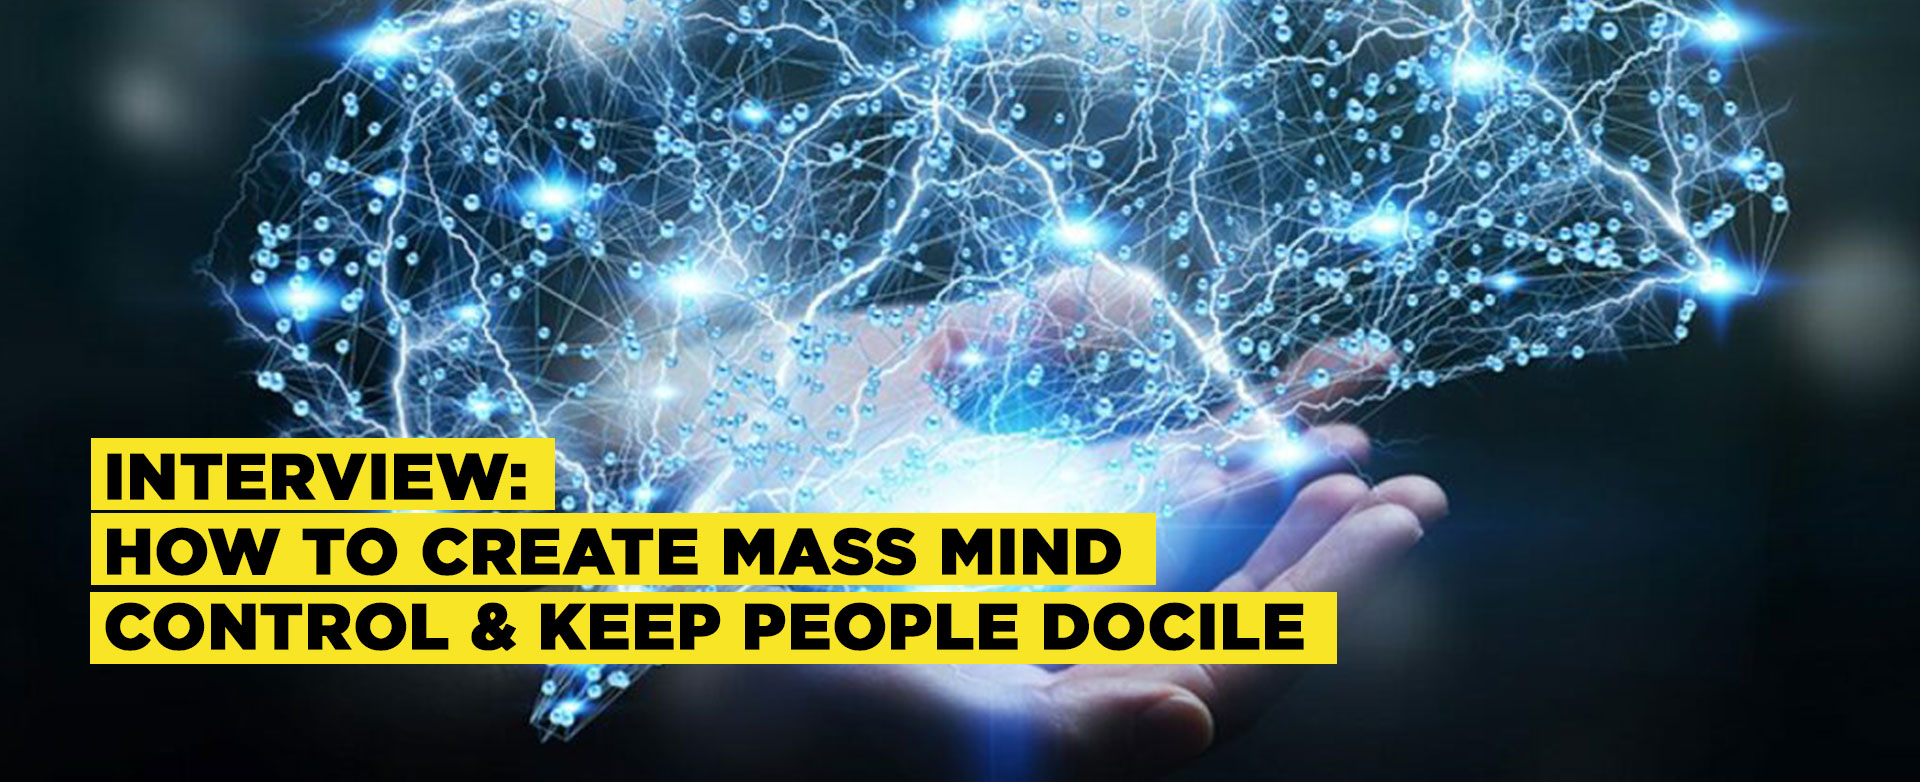 MyPatriotsNetwork-INTERVIEW: How To Create Mass Mind Control & Keep People Docile